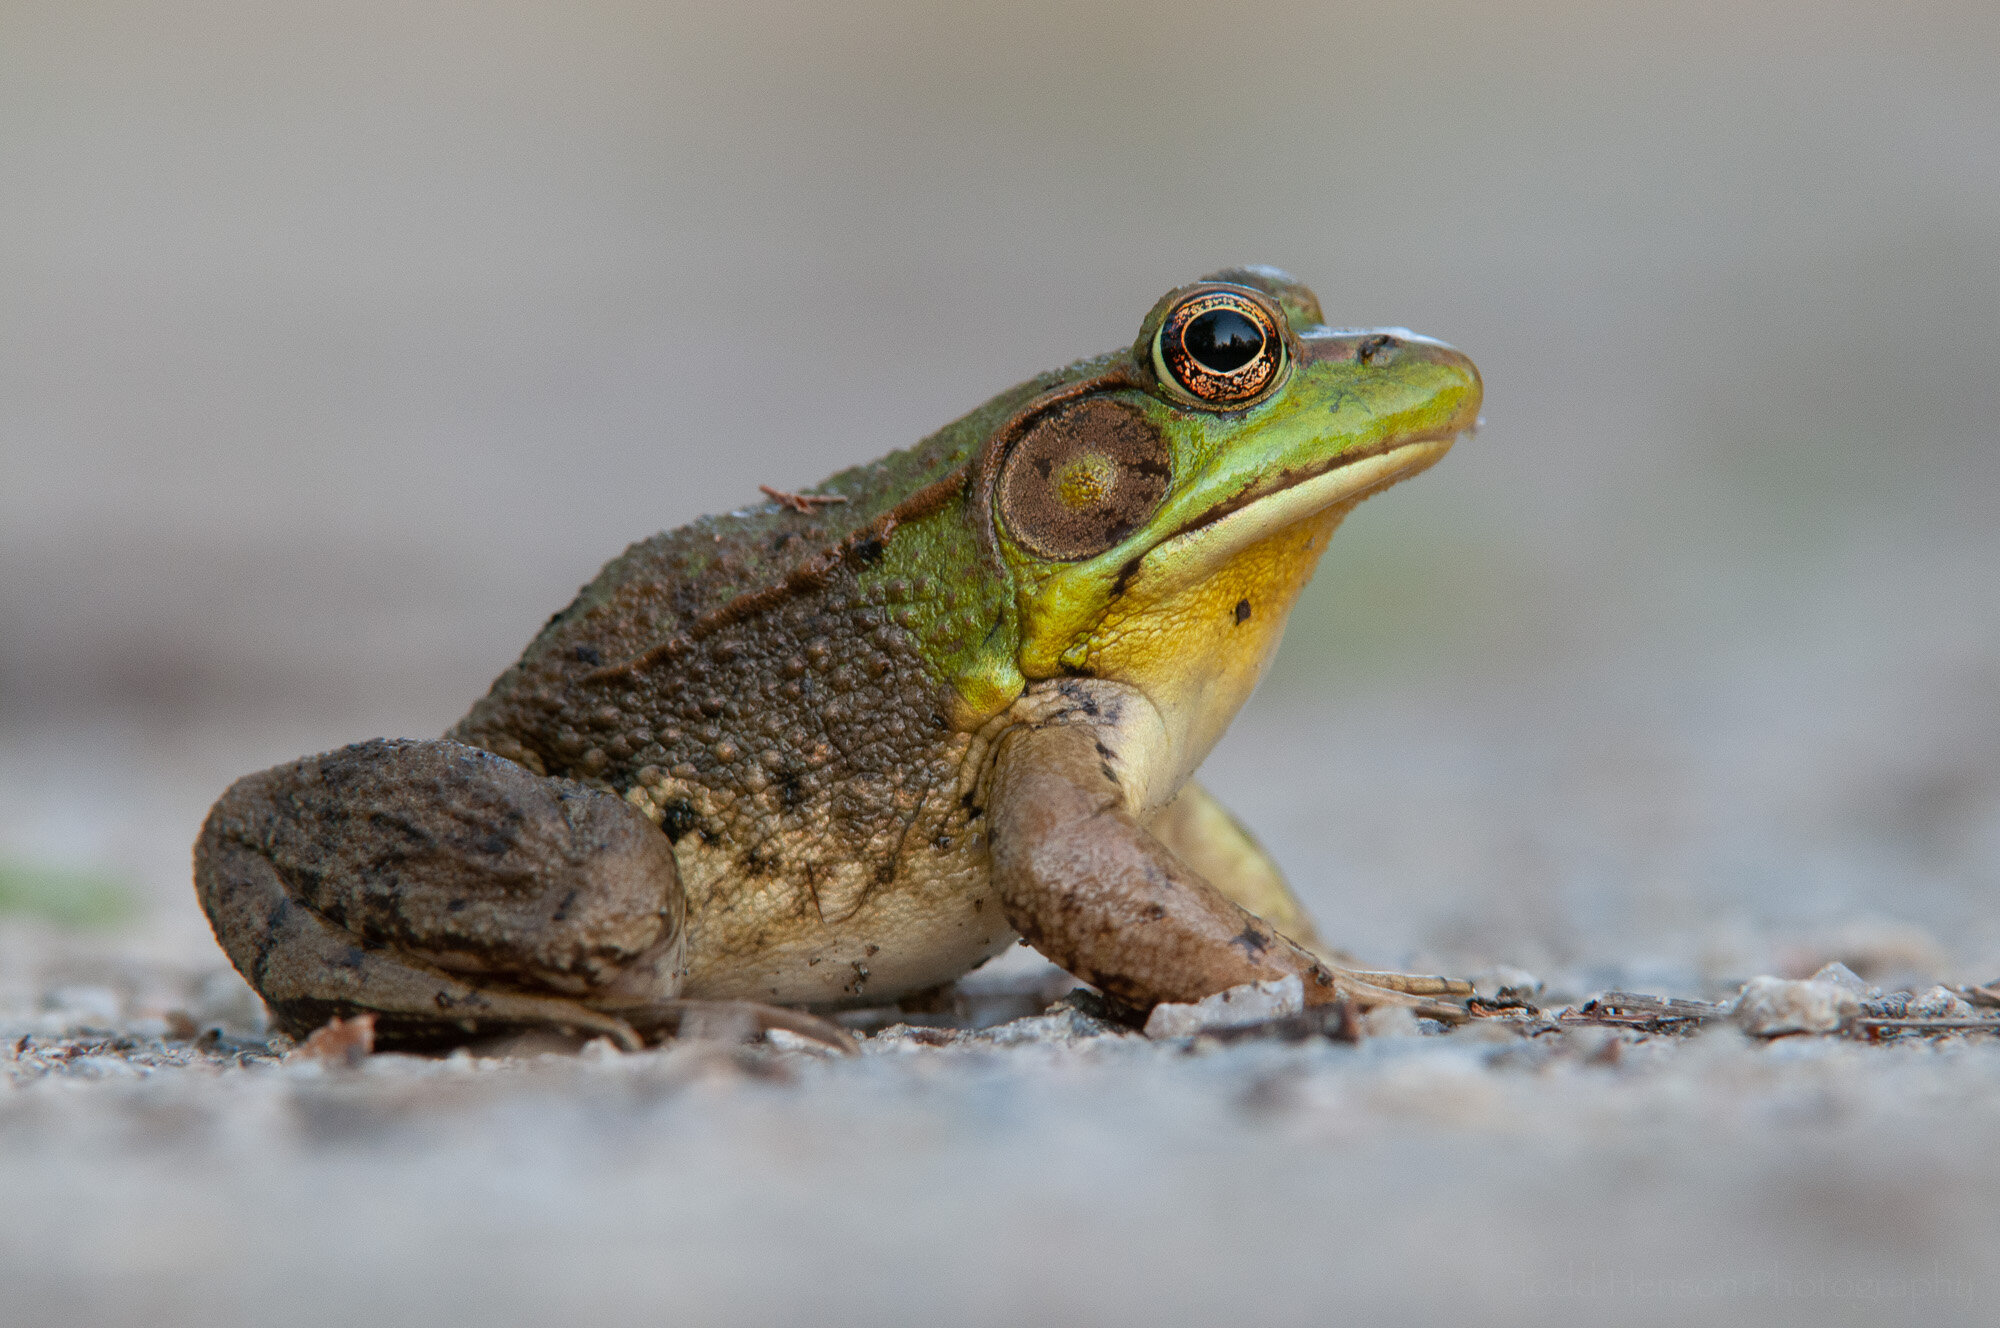  Portrait of a Green Frog: Before 